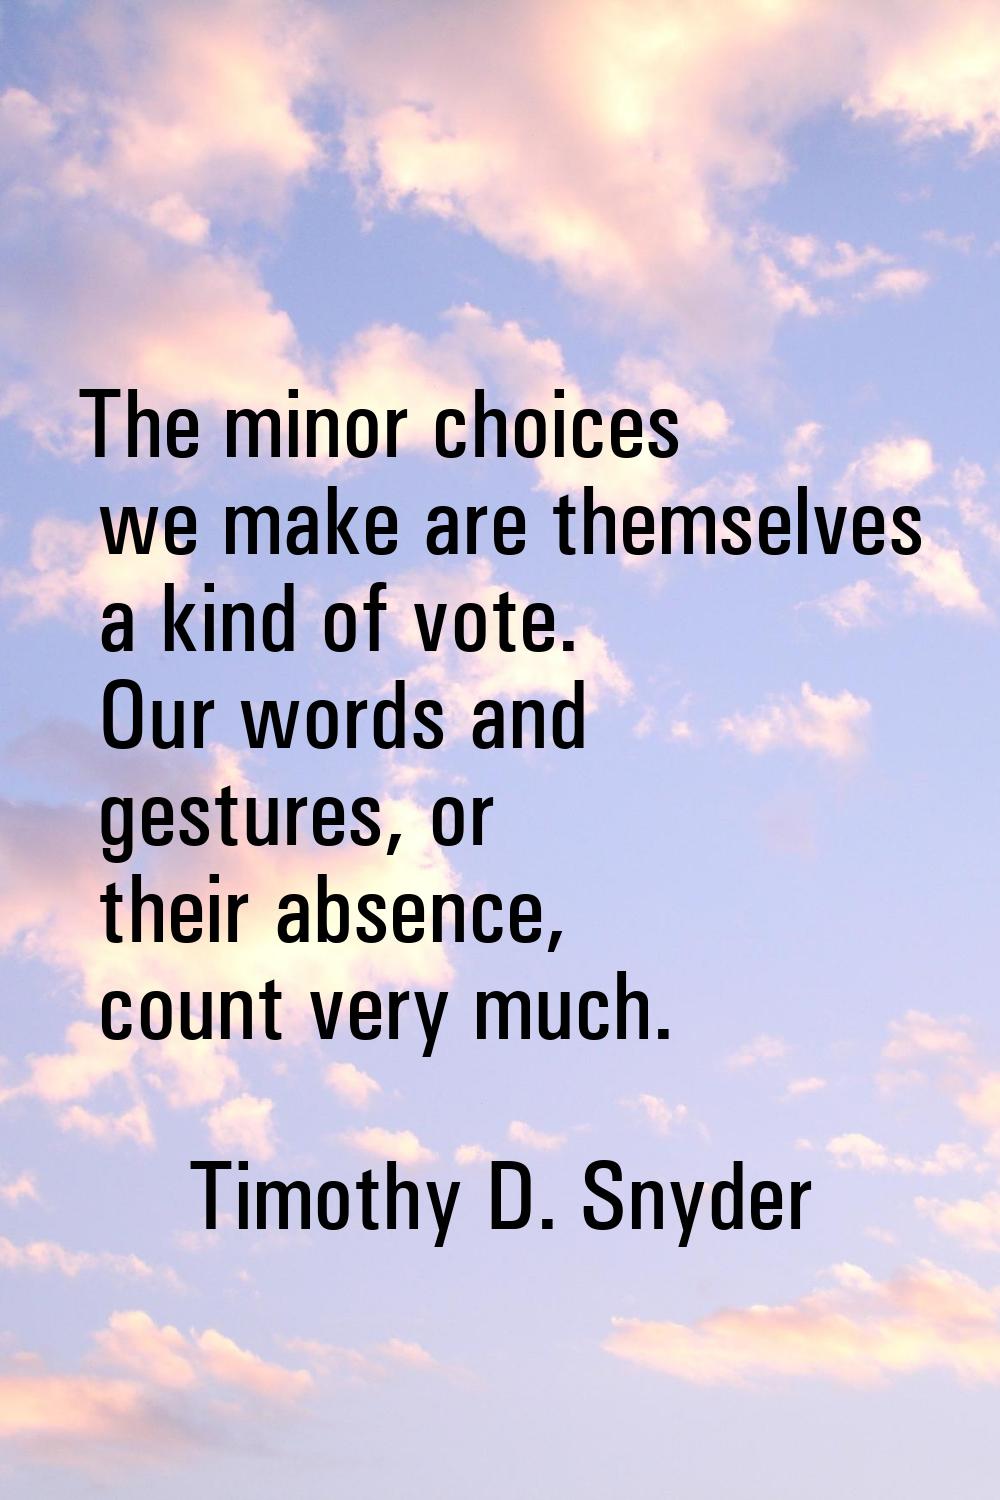 The minor choices we make are themselves a kind of vote. Our words and gestures, or their absence, 